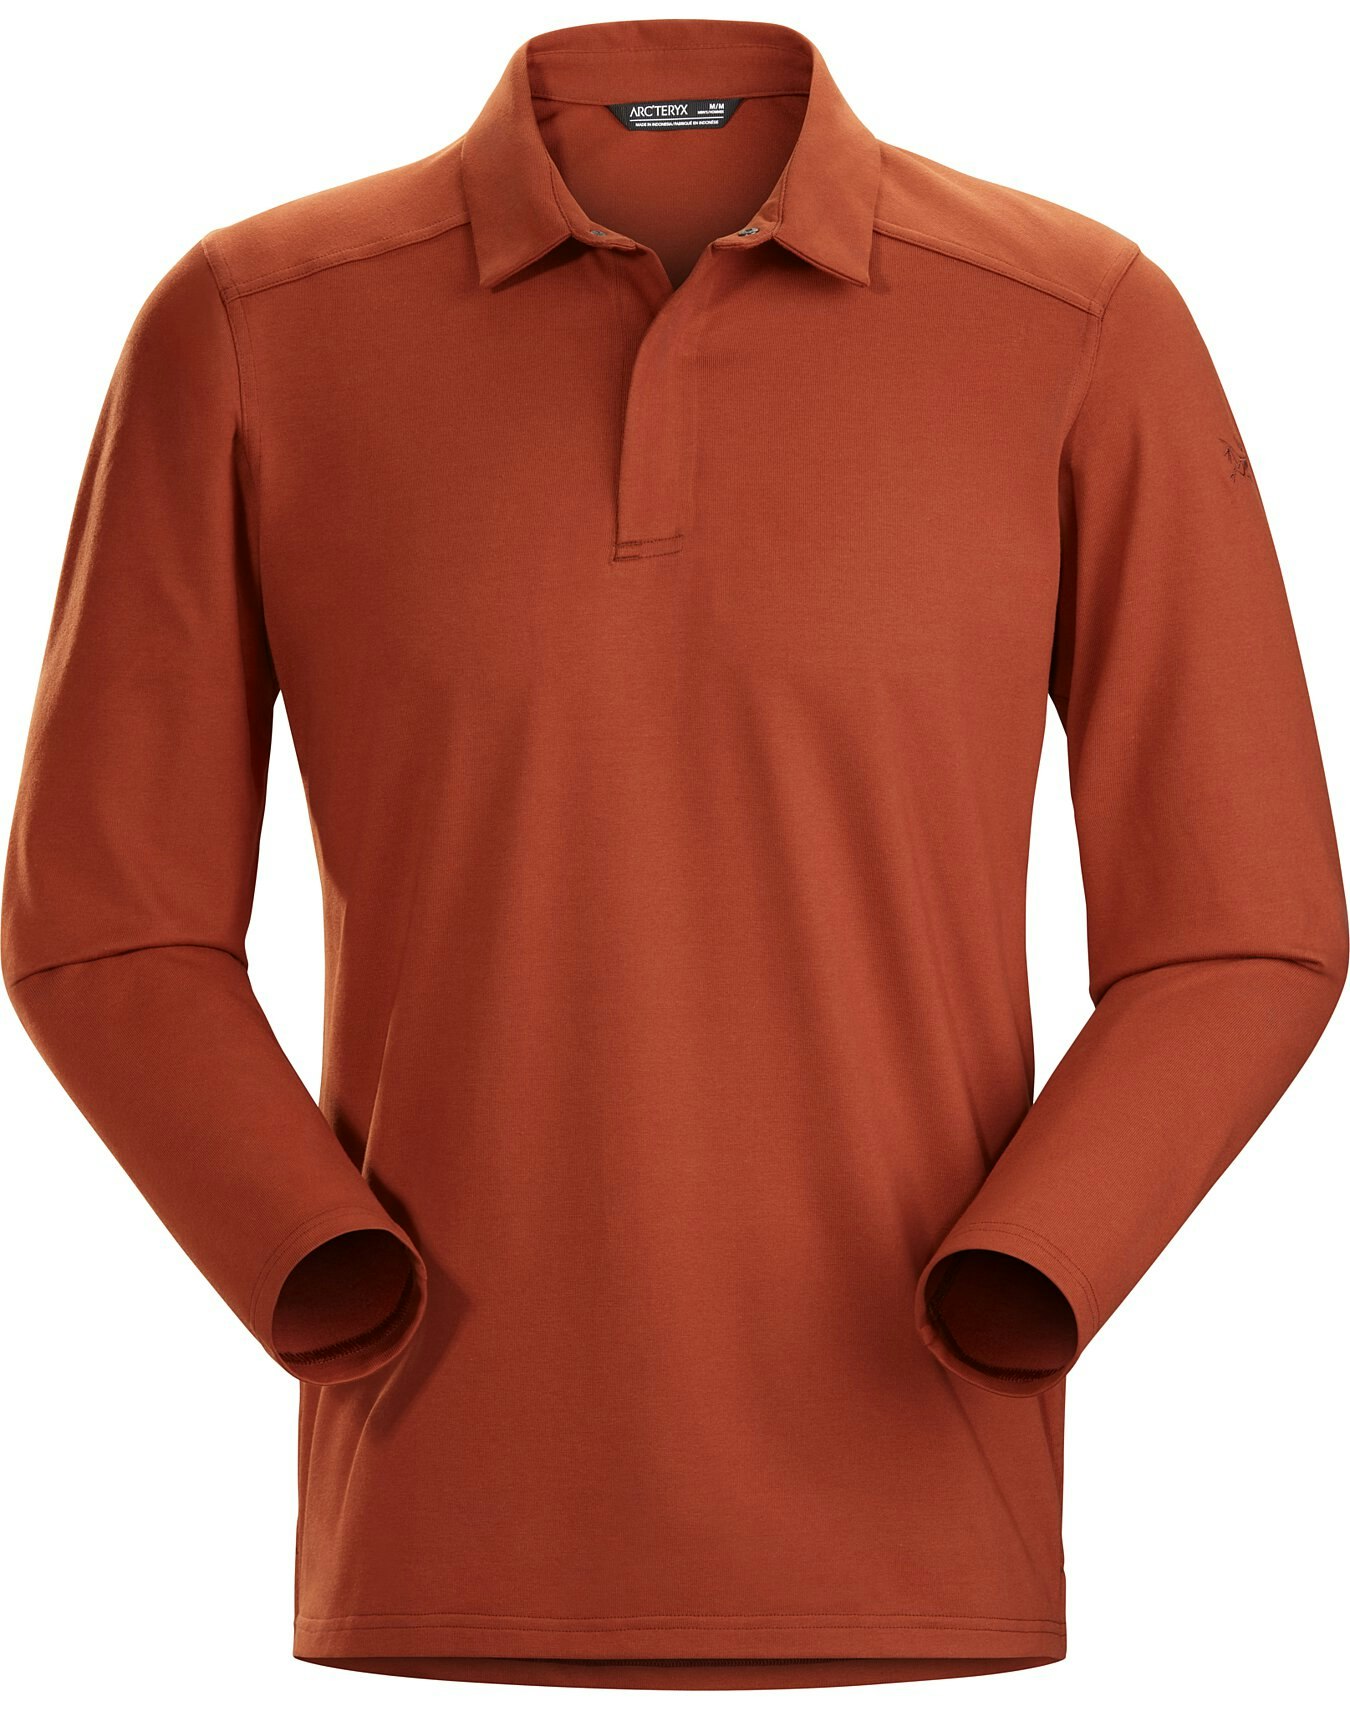 Download Mens Long Sleeve Polo Shirt Front View Images ...